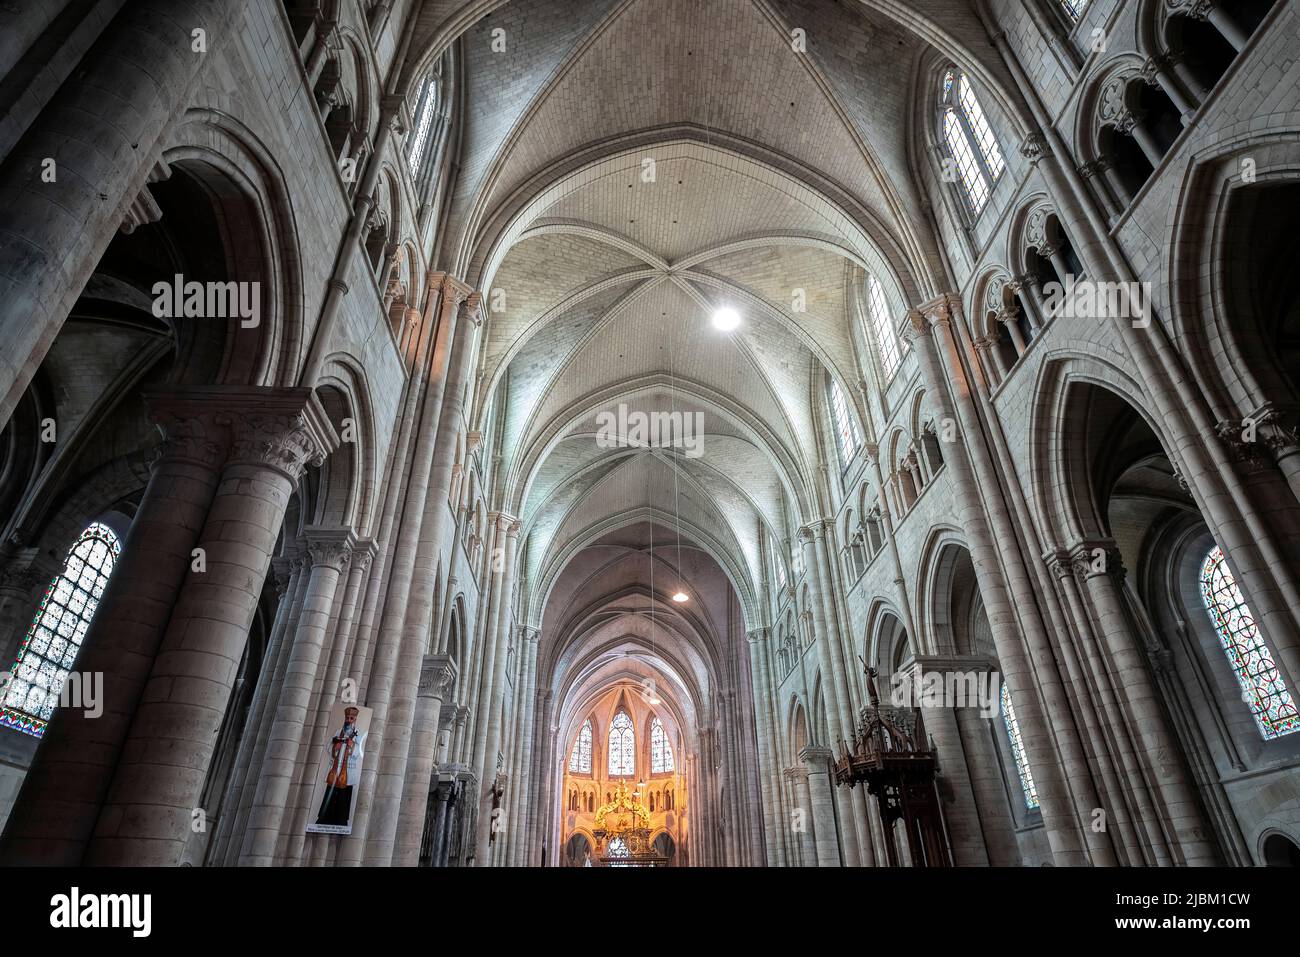 Central nave of the  Sens Saint-Etienne cathedral. Sens Cathedral is a Catholic cathedral in Sens in Burgundy, France. Stock Photo